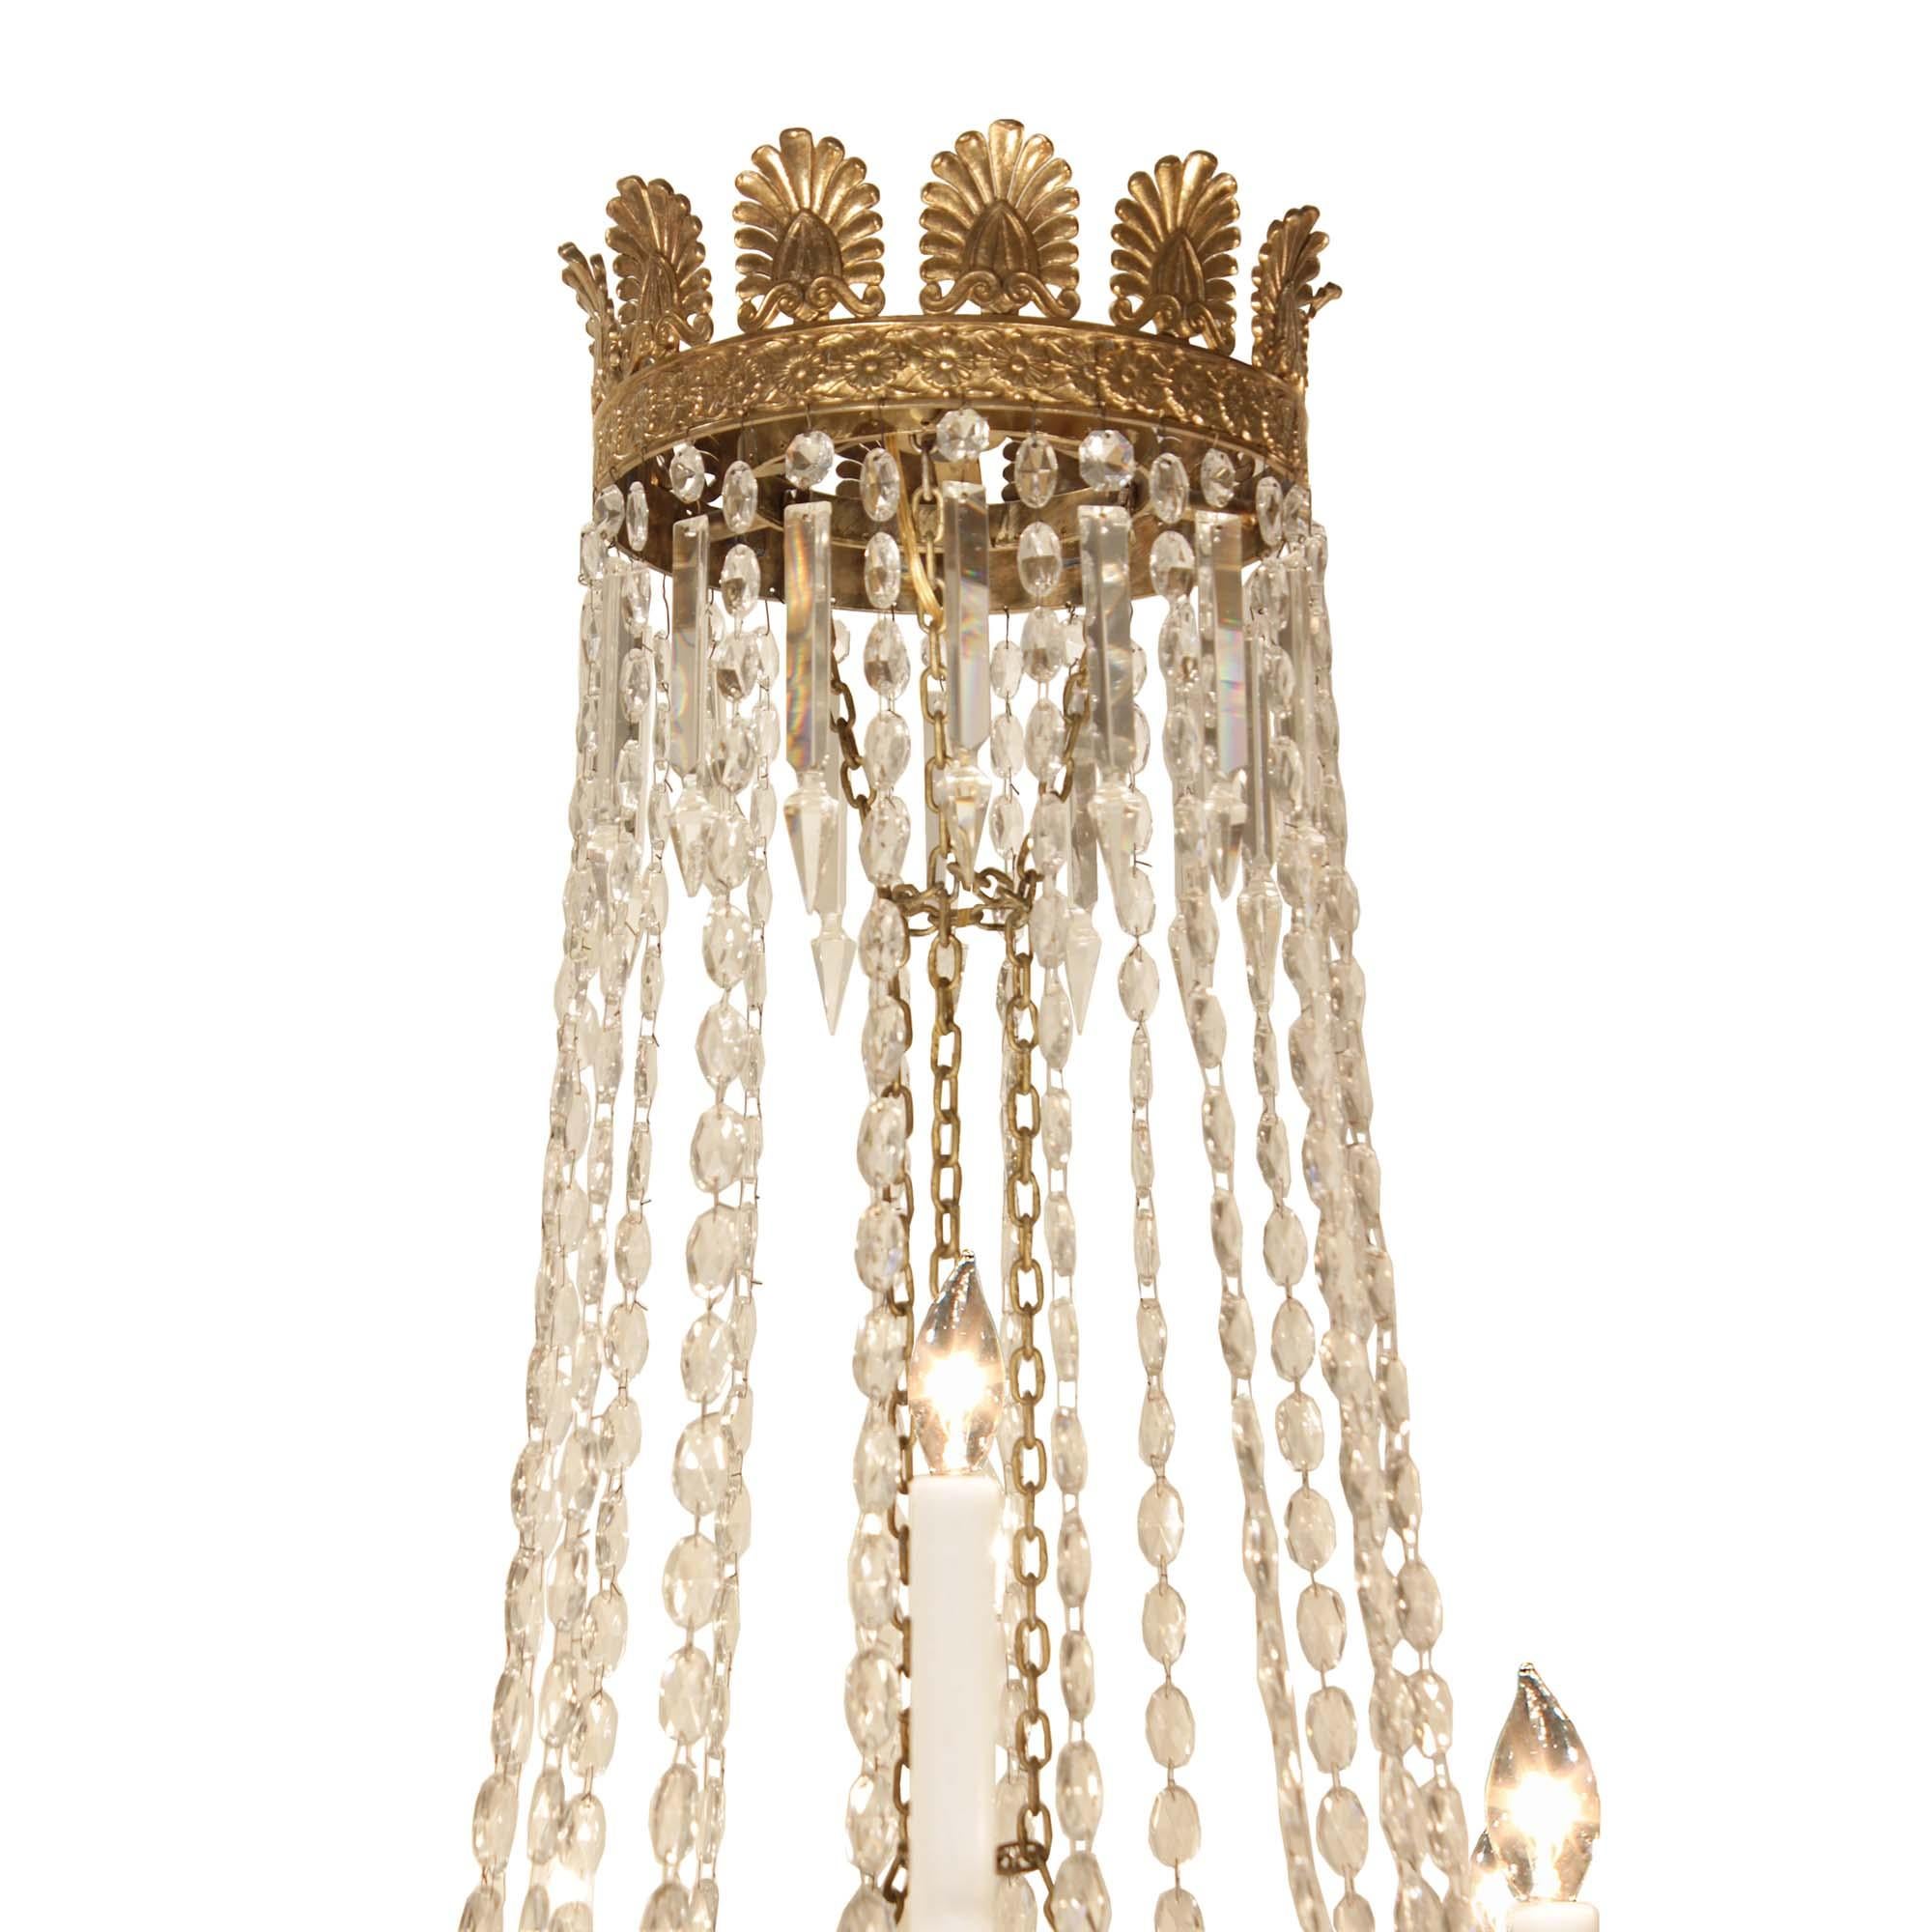 A stunning French 19th century neo-classical st. crystal and ormolu chandelier. At the base of the chandelier are eight descending circular ormolu bands of impressive hanging crystals and a central ormolu acorn finial at the bottom. Above are the